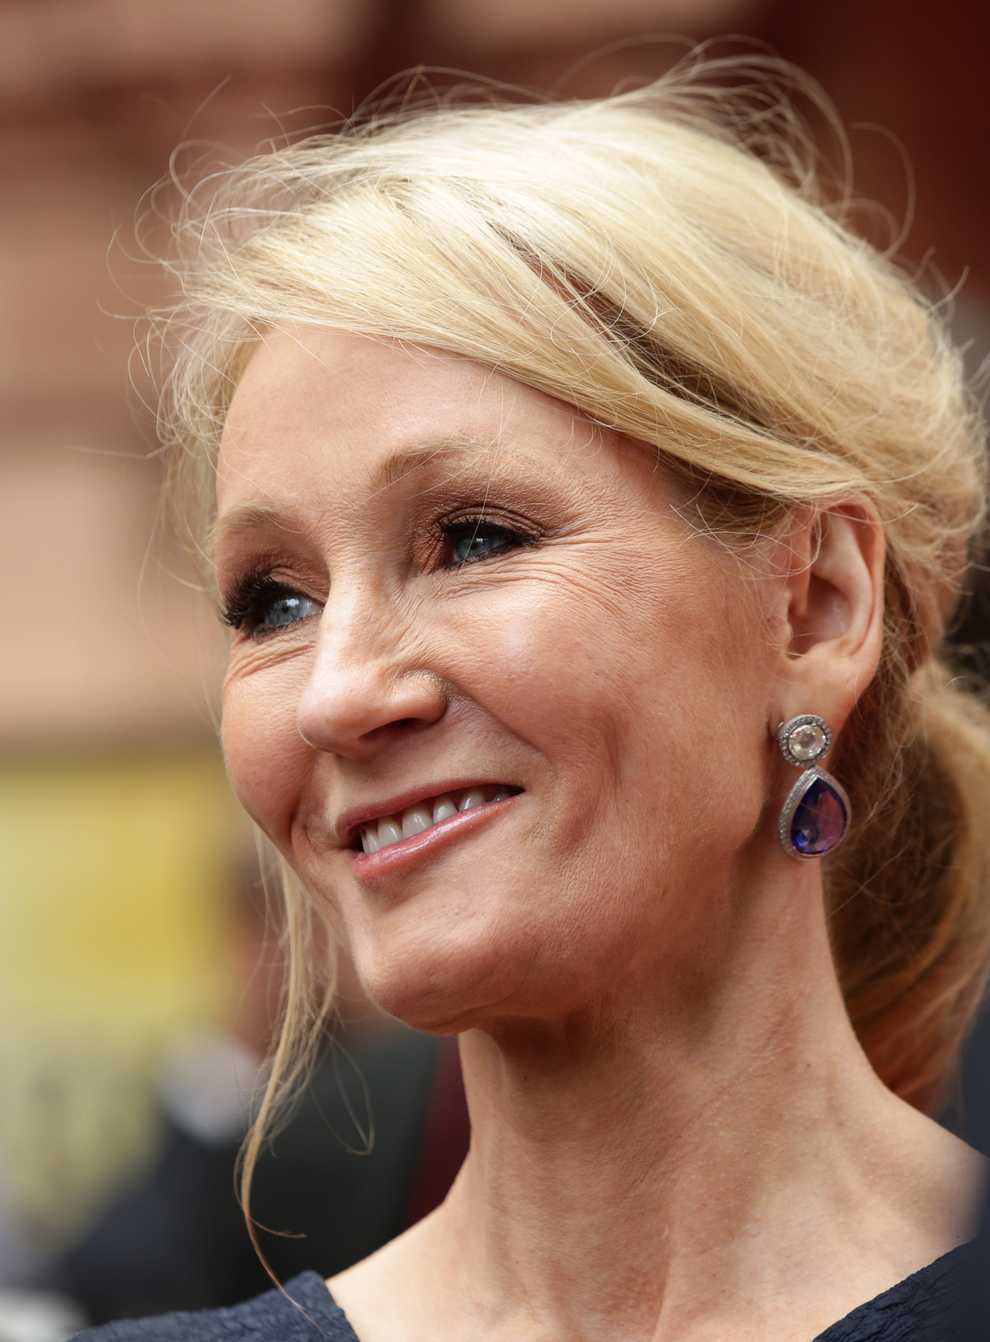 JK Rowling has shared her doxxing experience after activists posed outside her home with ‘Trans liberation now’ signs (Yui Mok/PA)